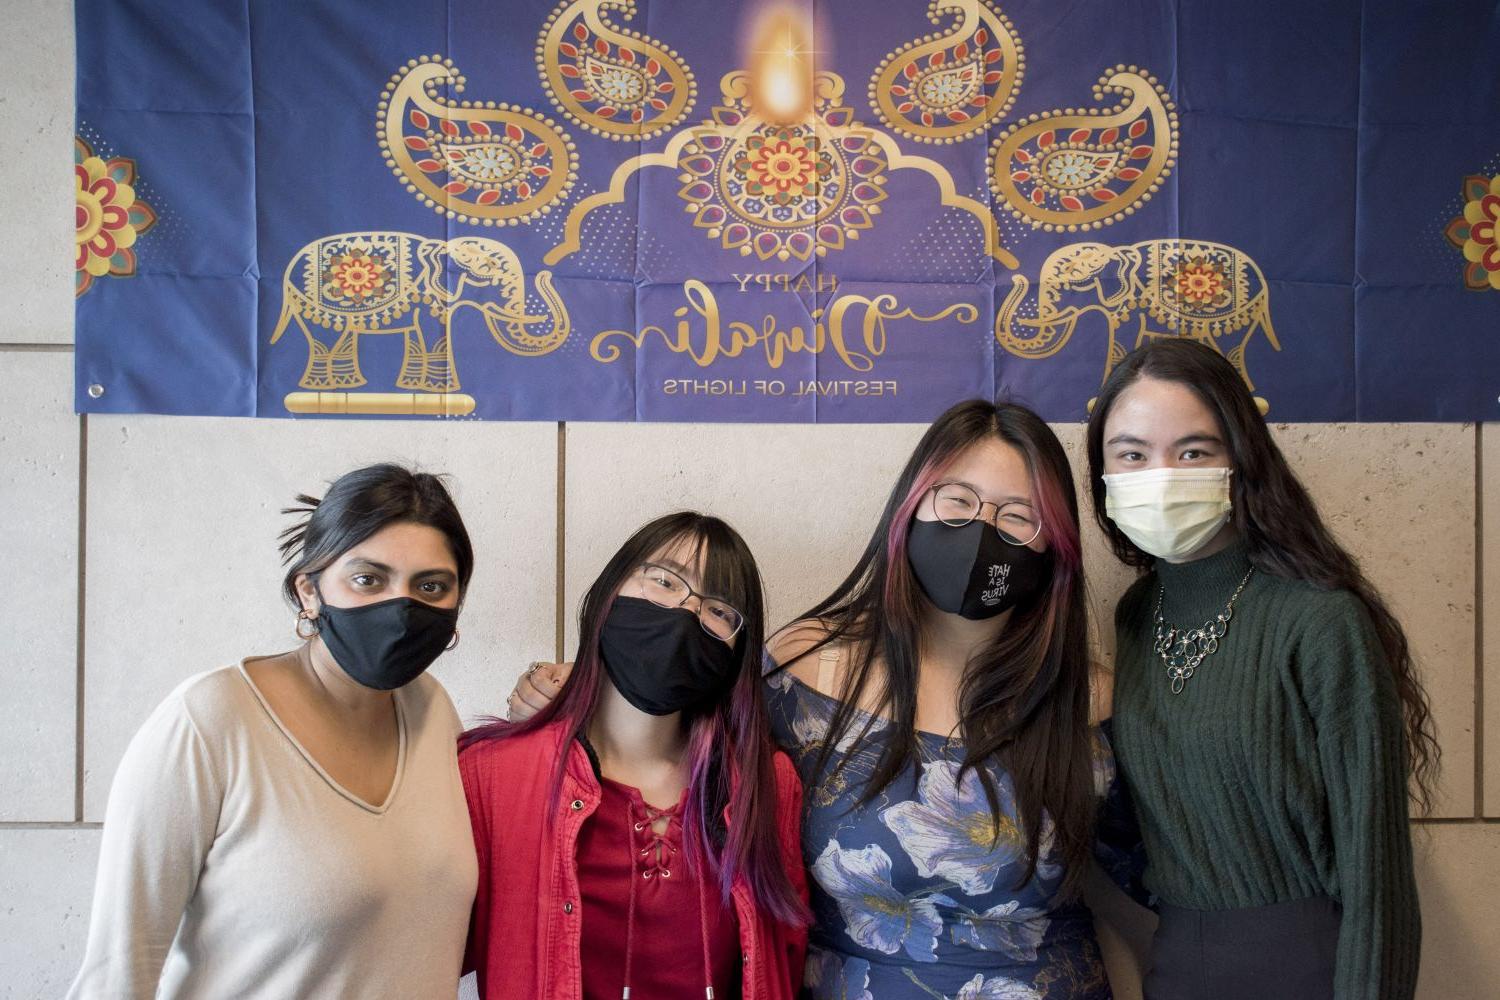 The Asian Pacific American Coalition of Carthage invited the campus community to a Diwali celebra...